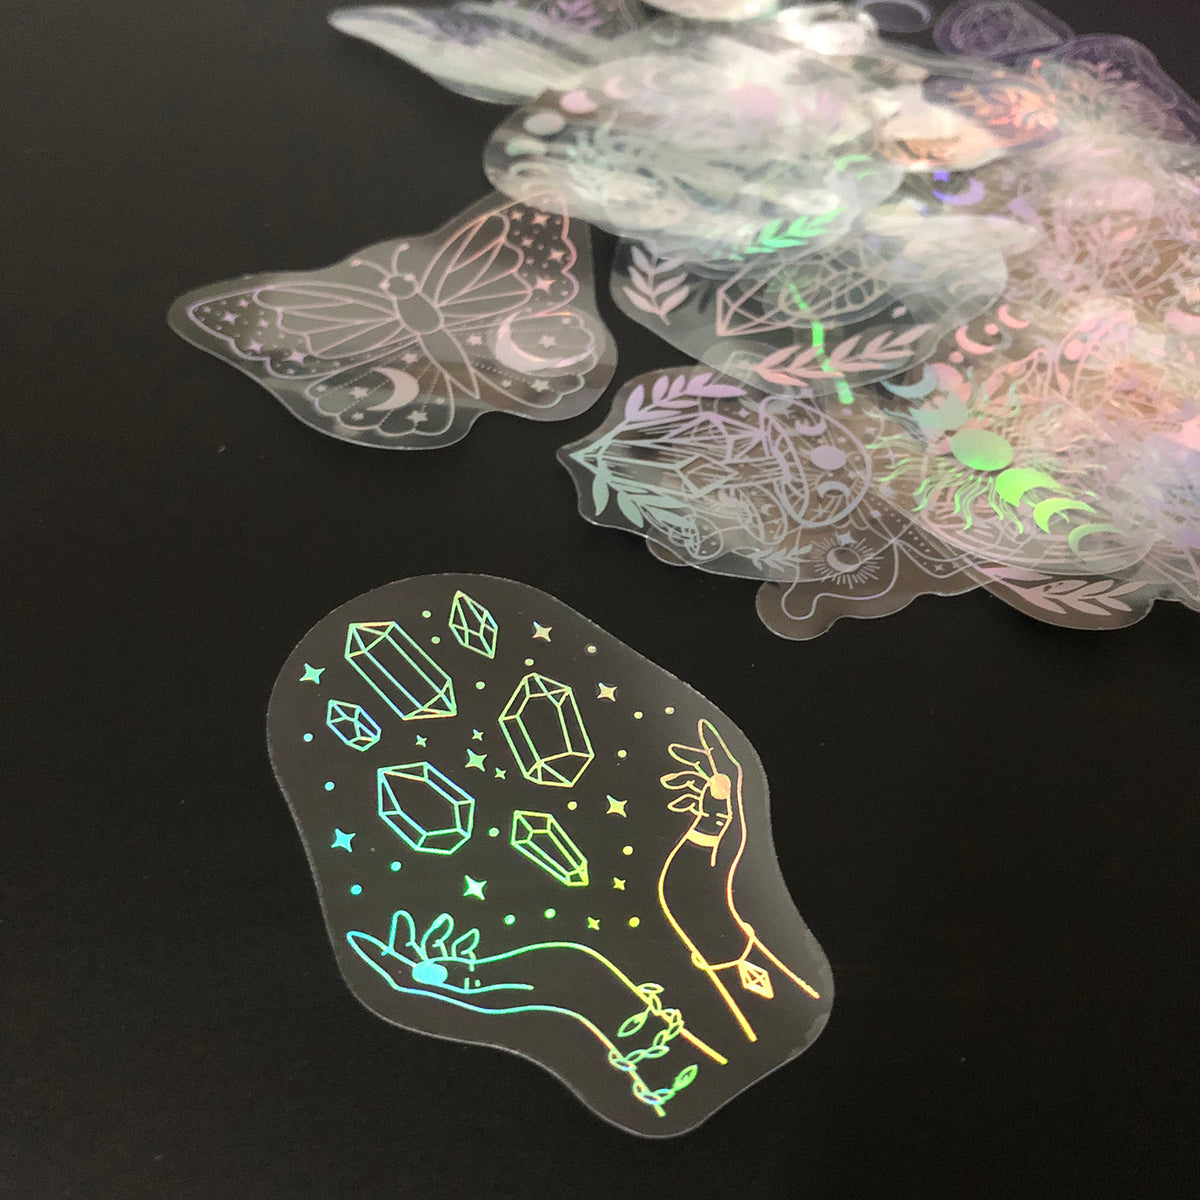 40pcs Holographic Glitter Stickers PET Transparent Shiny Waterproof Decorative Decals For Water Bottles Scrapbooking Laptop